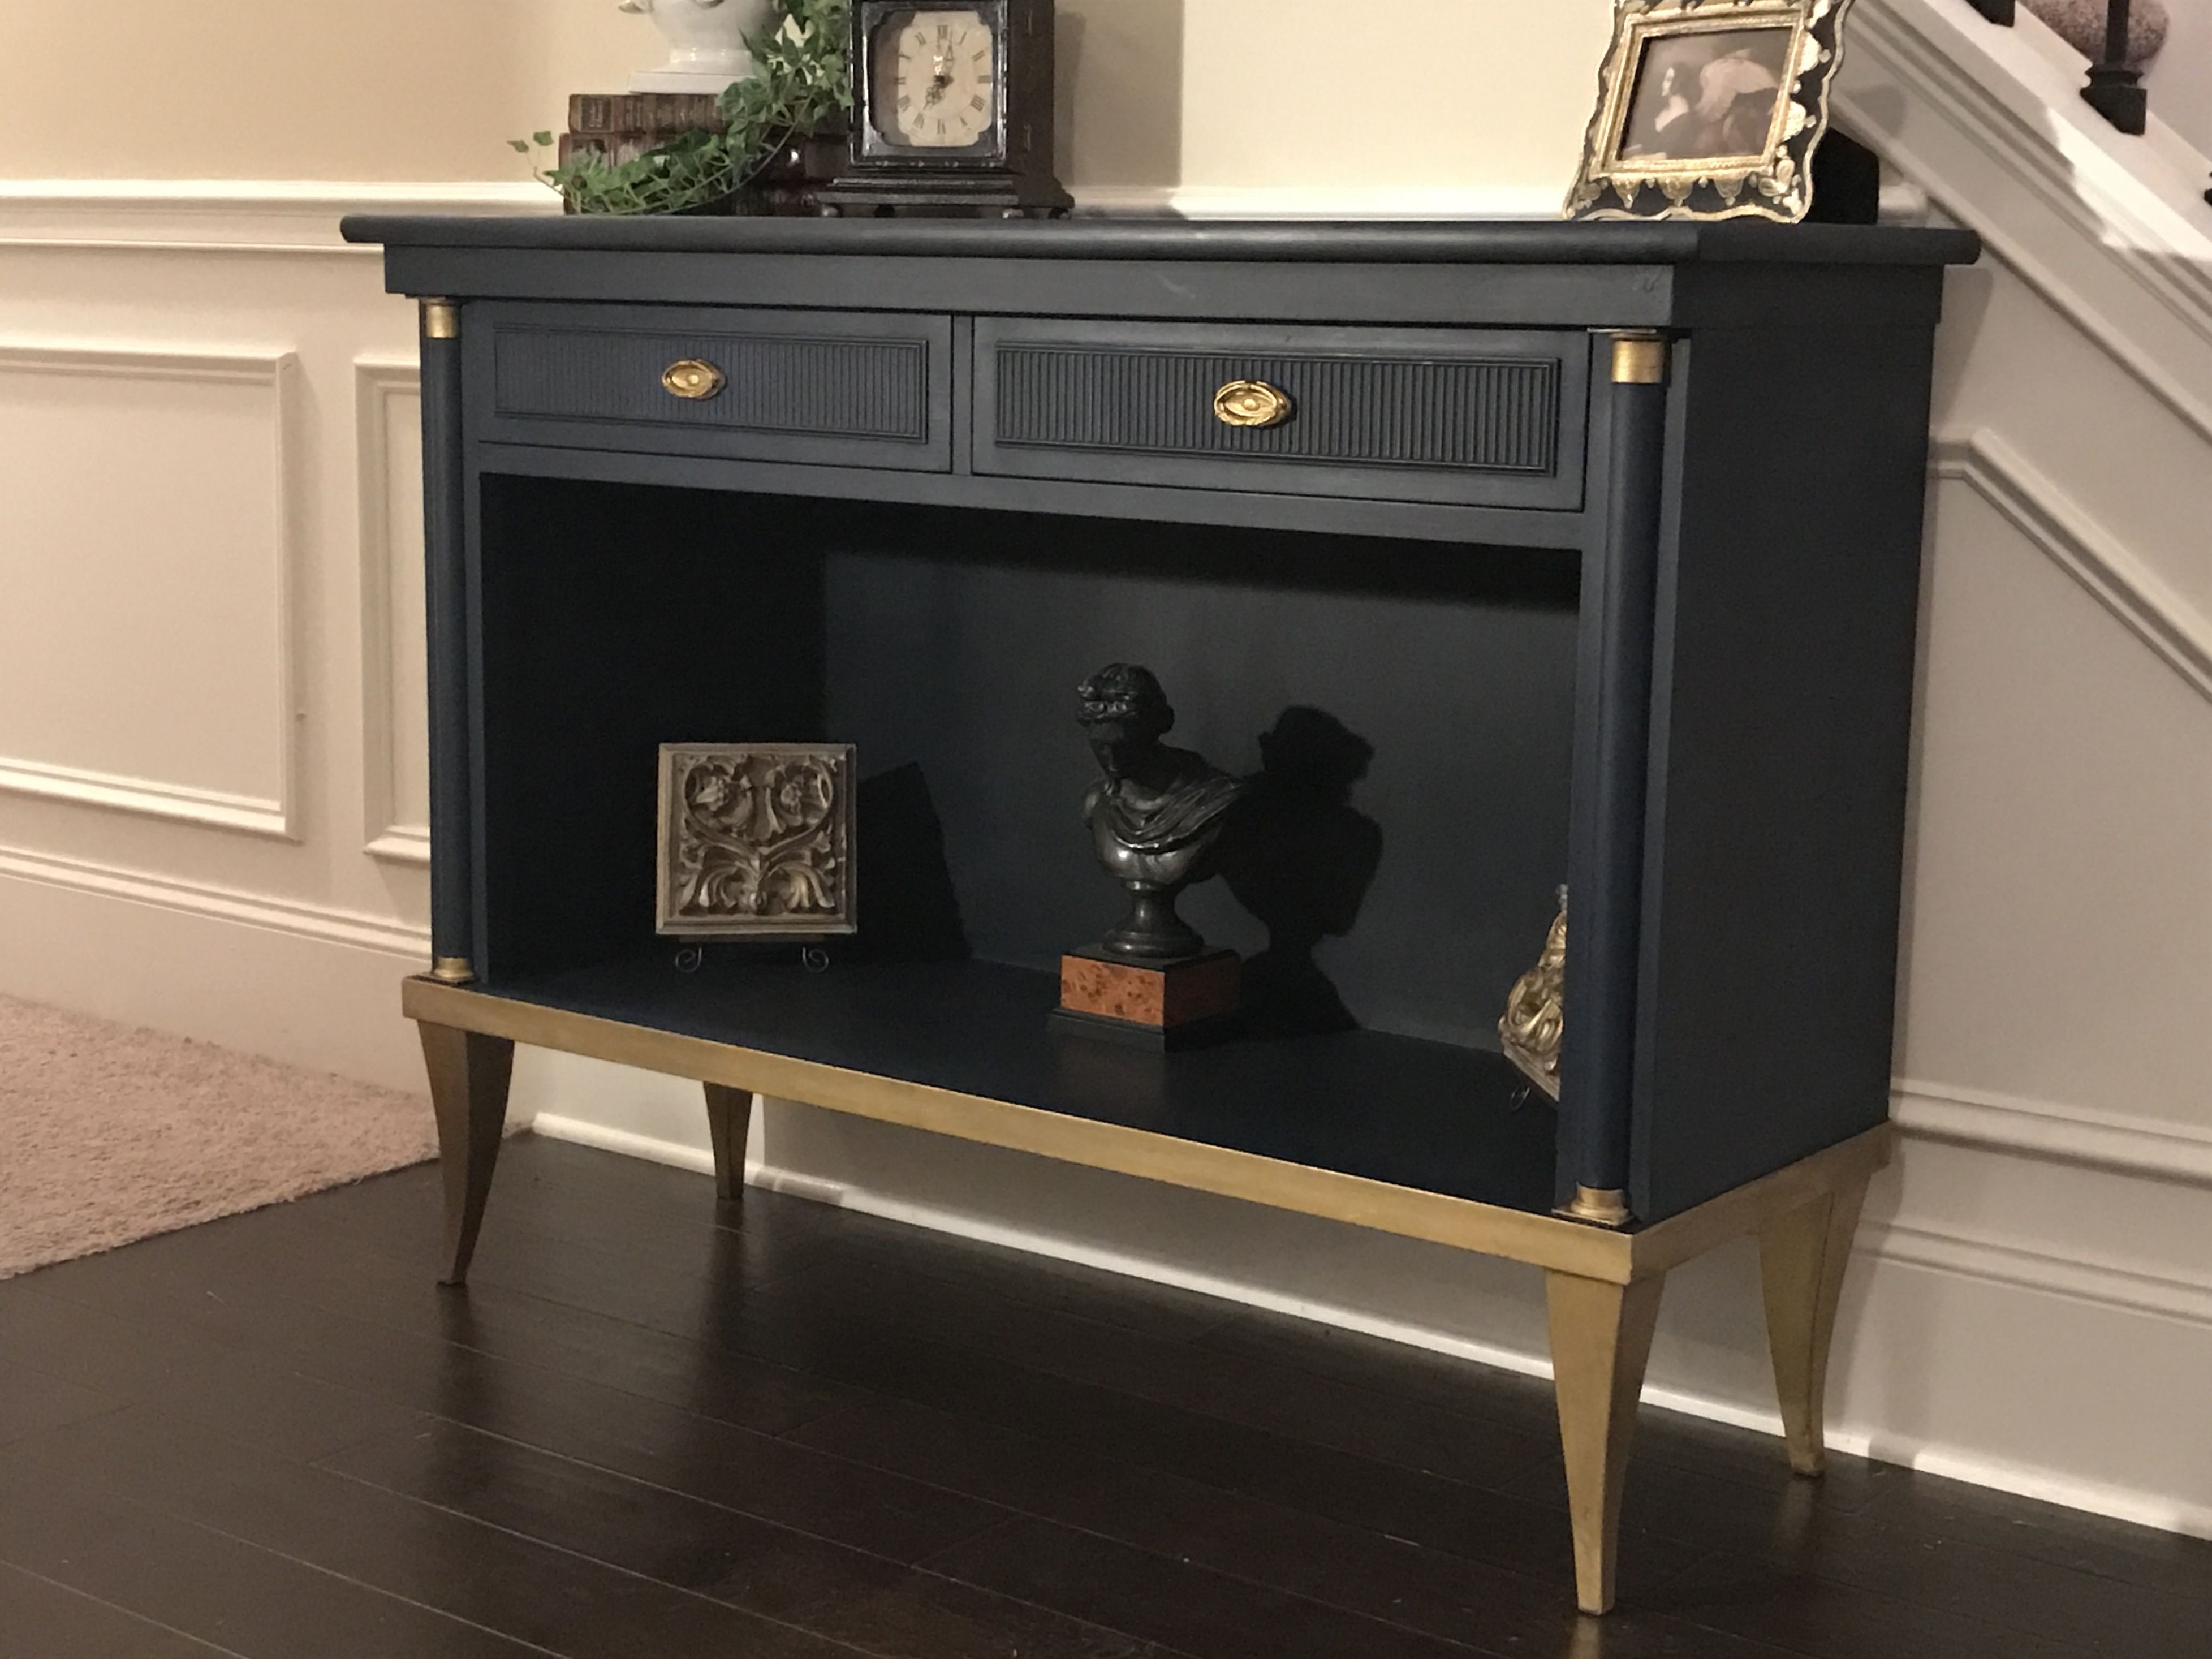 Annie Sloan Chalk Paint Napoleonic Blue And Black Wax, Accents ..